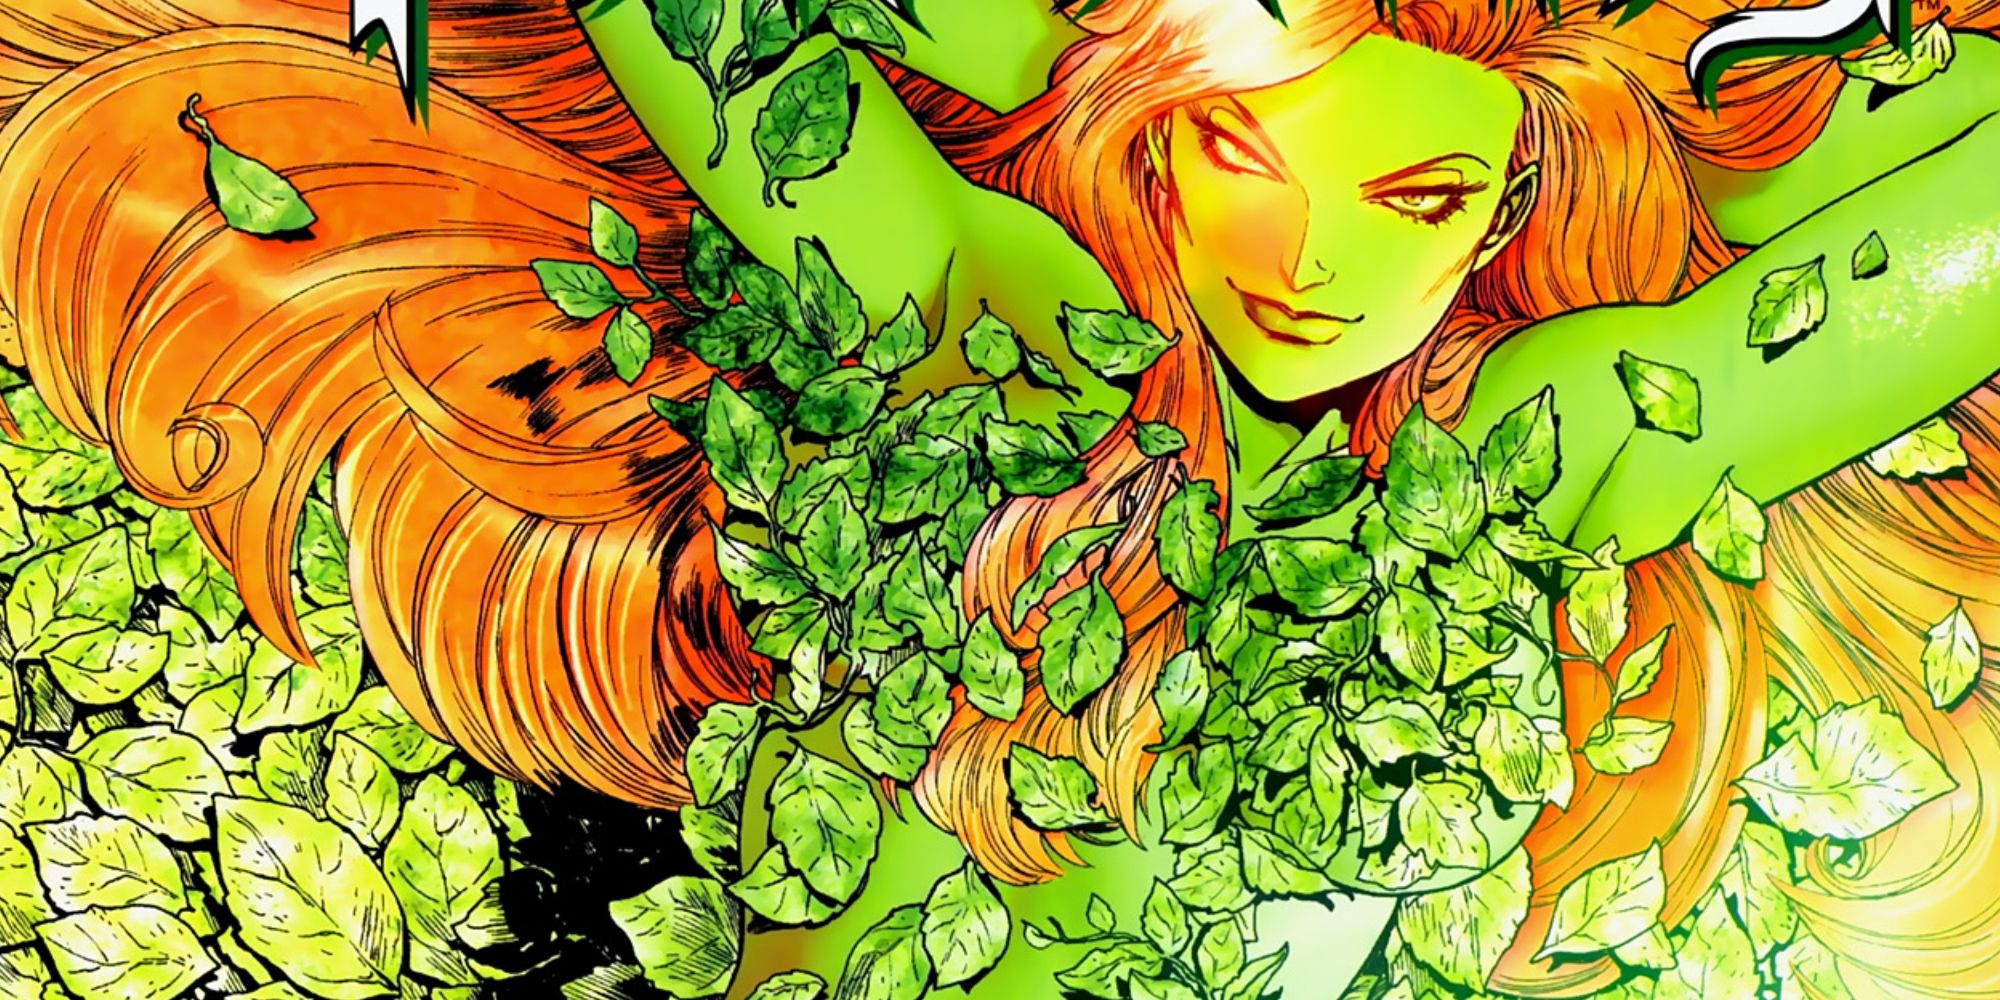 Poison Ivy covered in leaves in DC Comics.